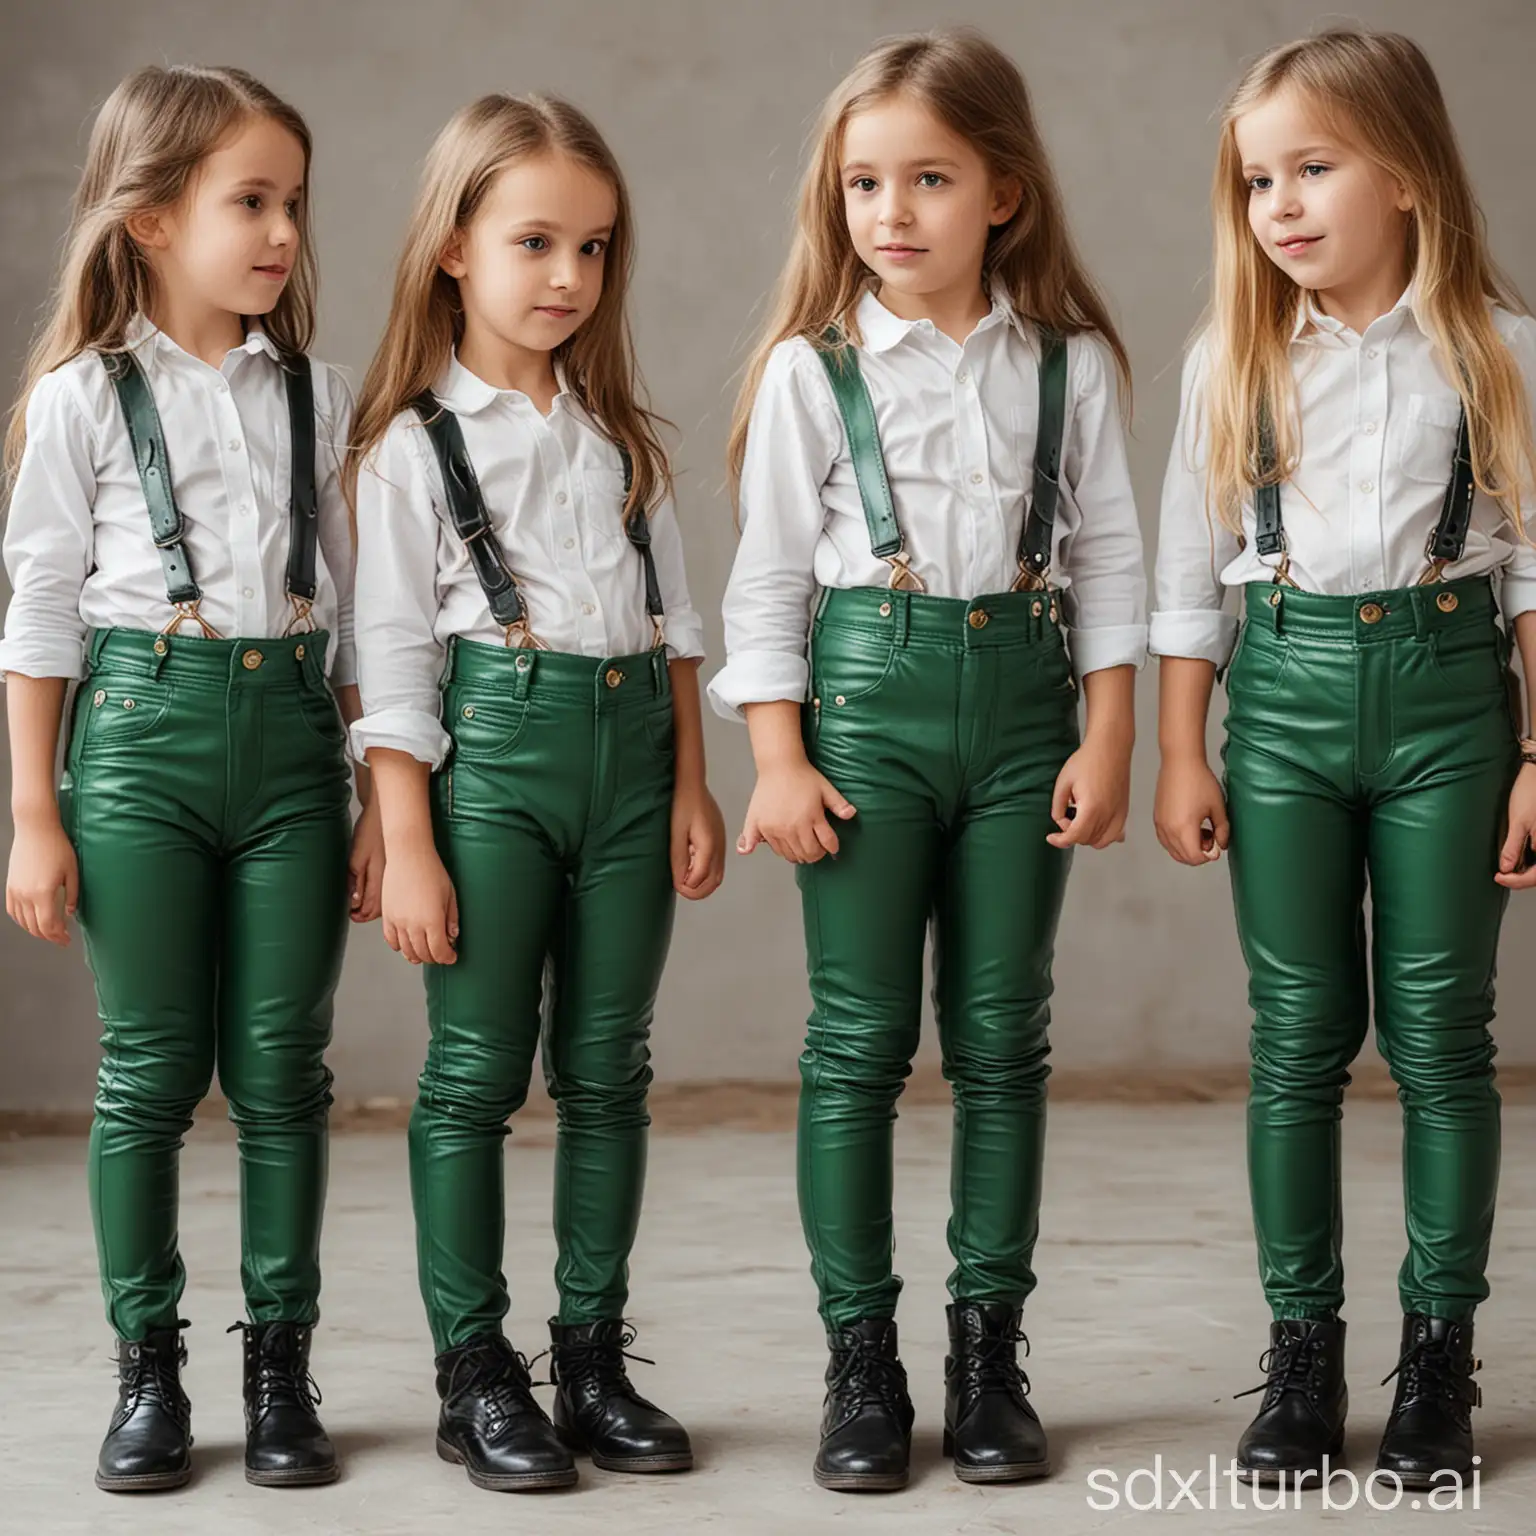 Children Girls in green Leather Pants